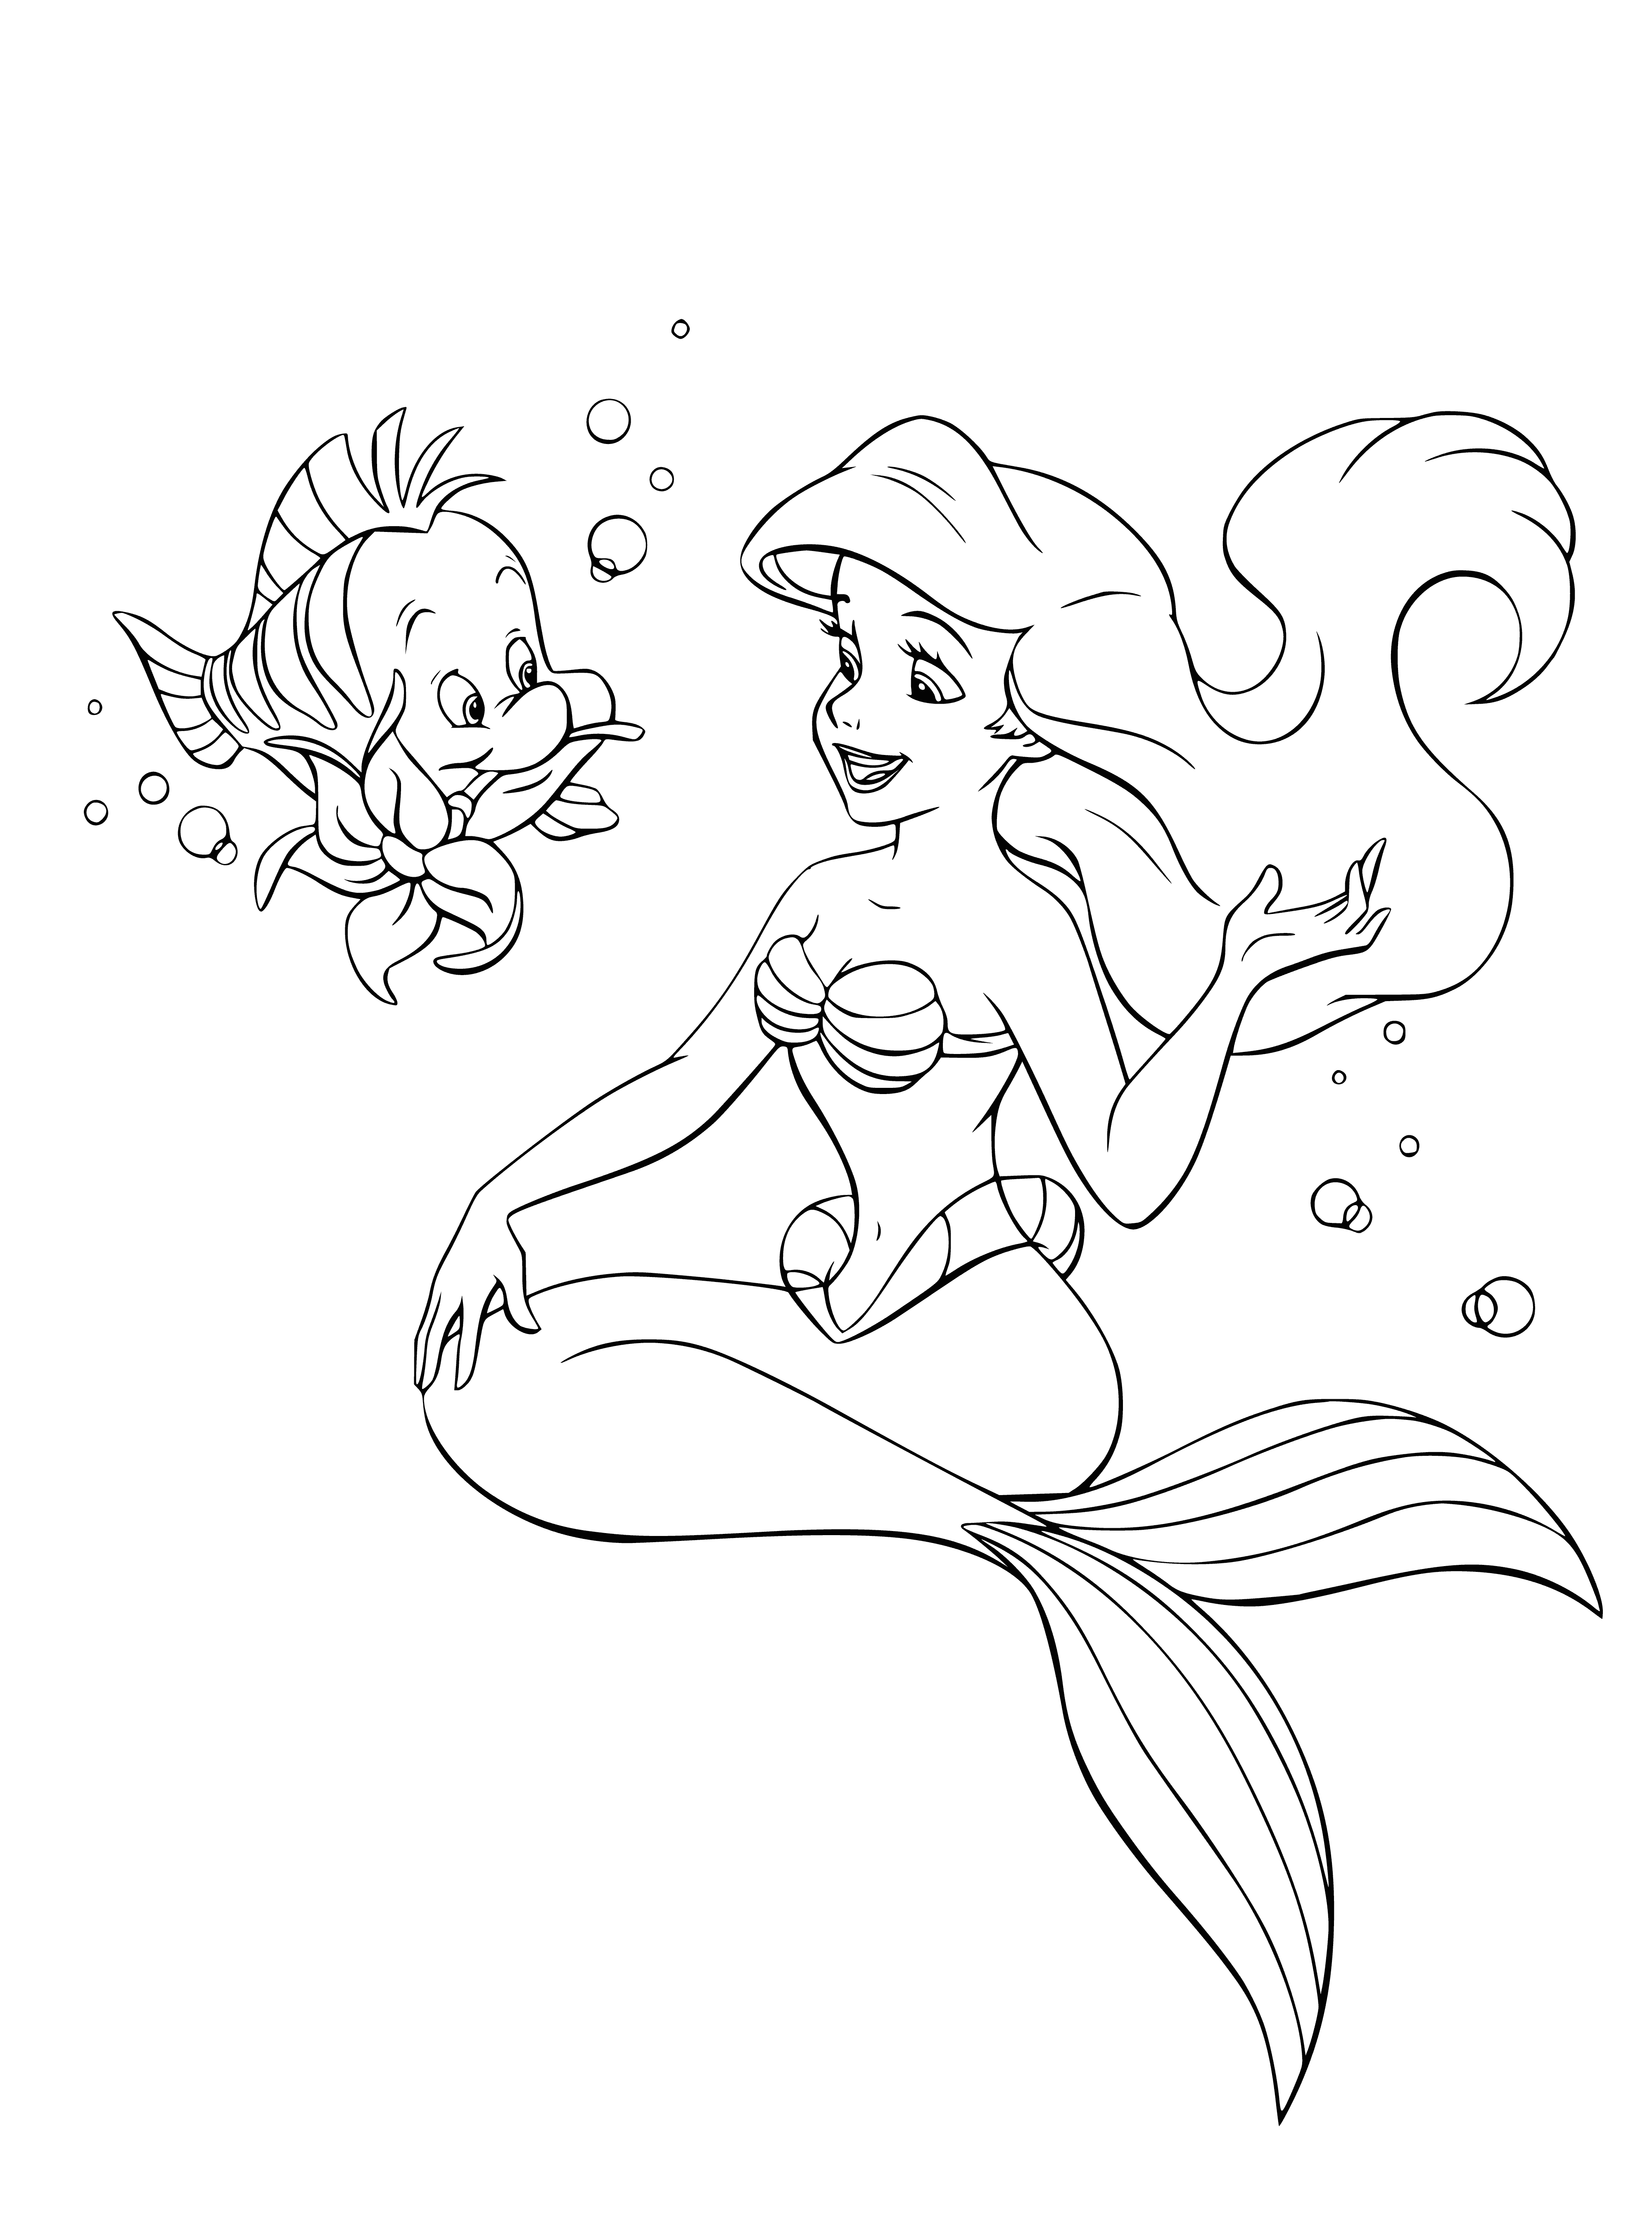 coloring page: Ariel and Sebastian sit on a rock in the ocean, Ariel holding a book and Sebastian looking at her.